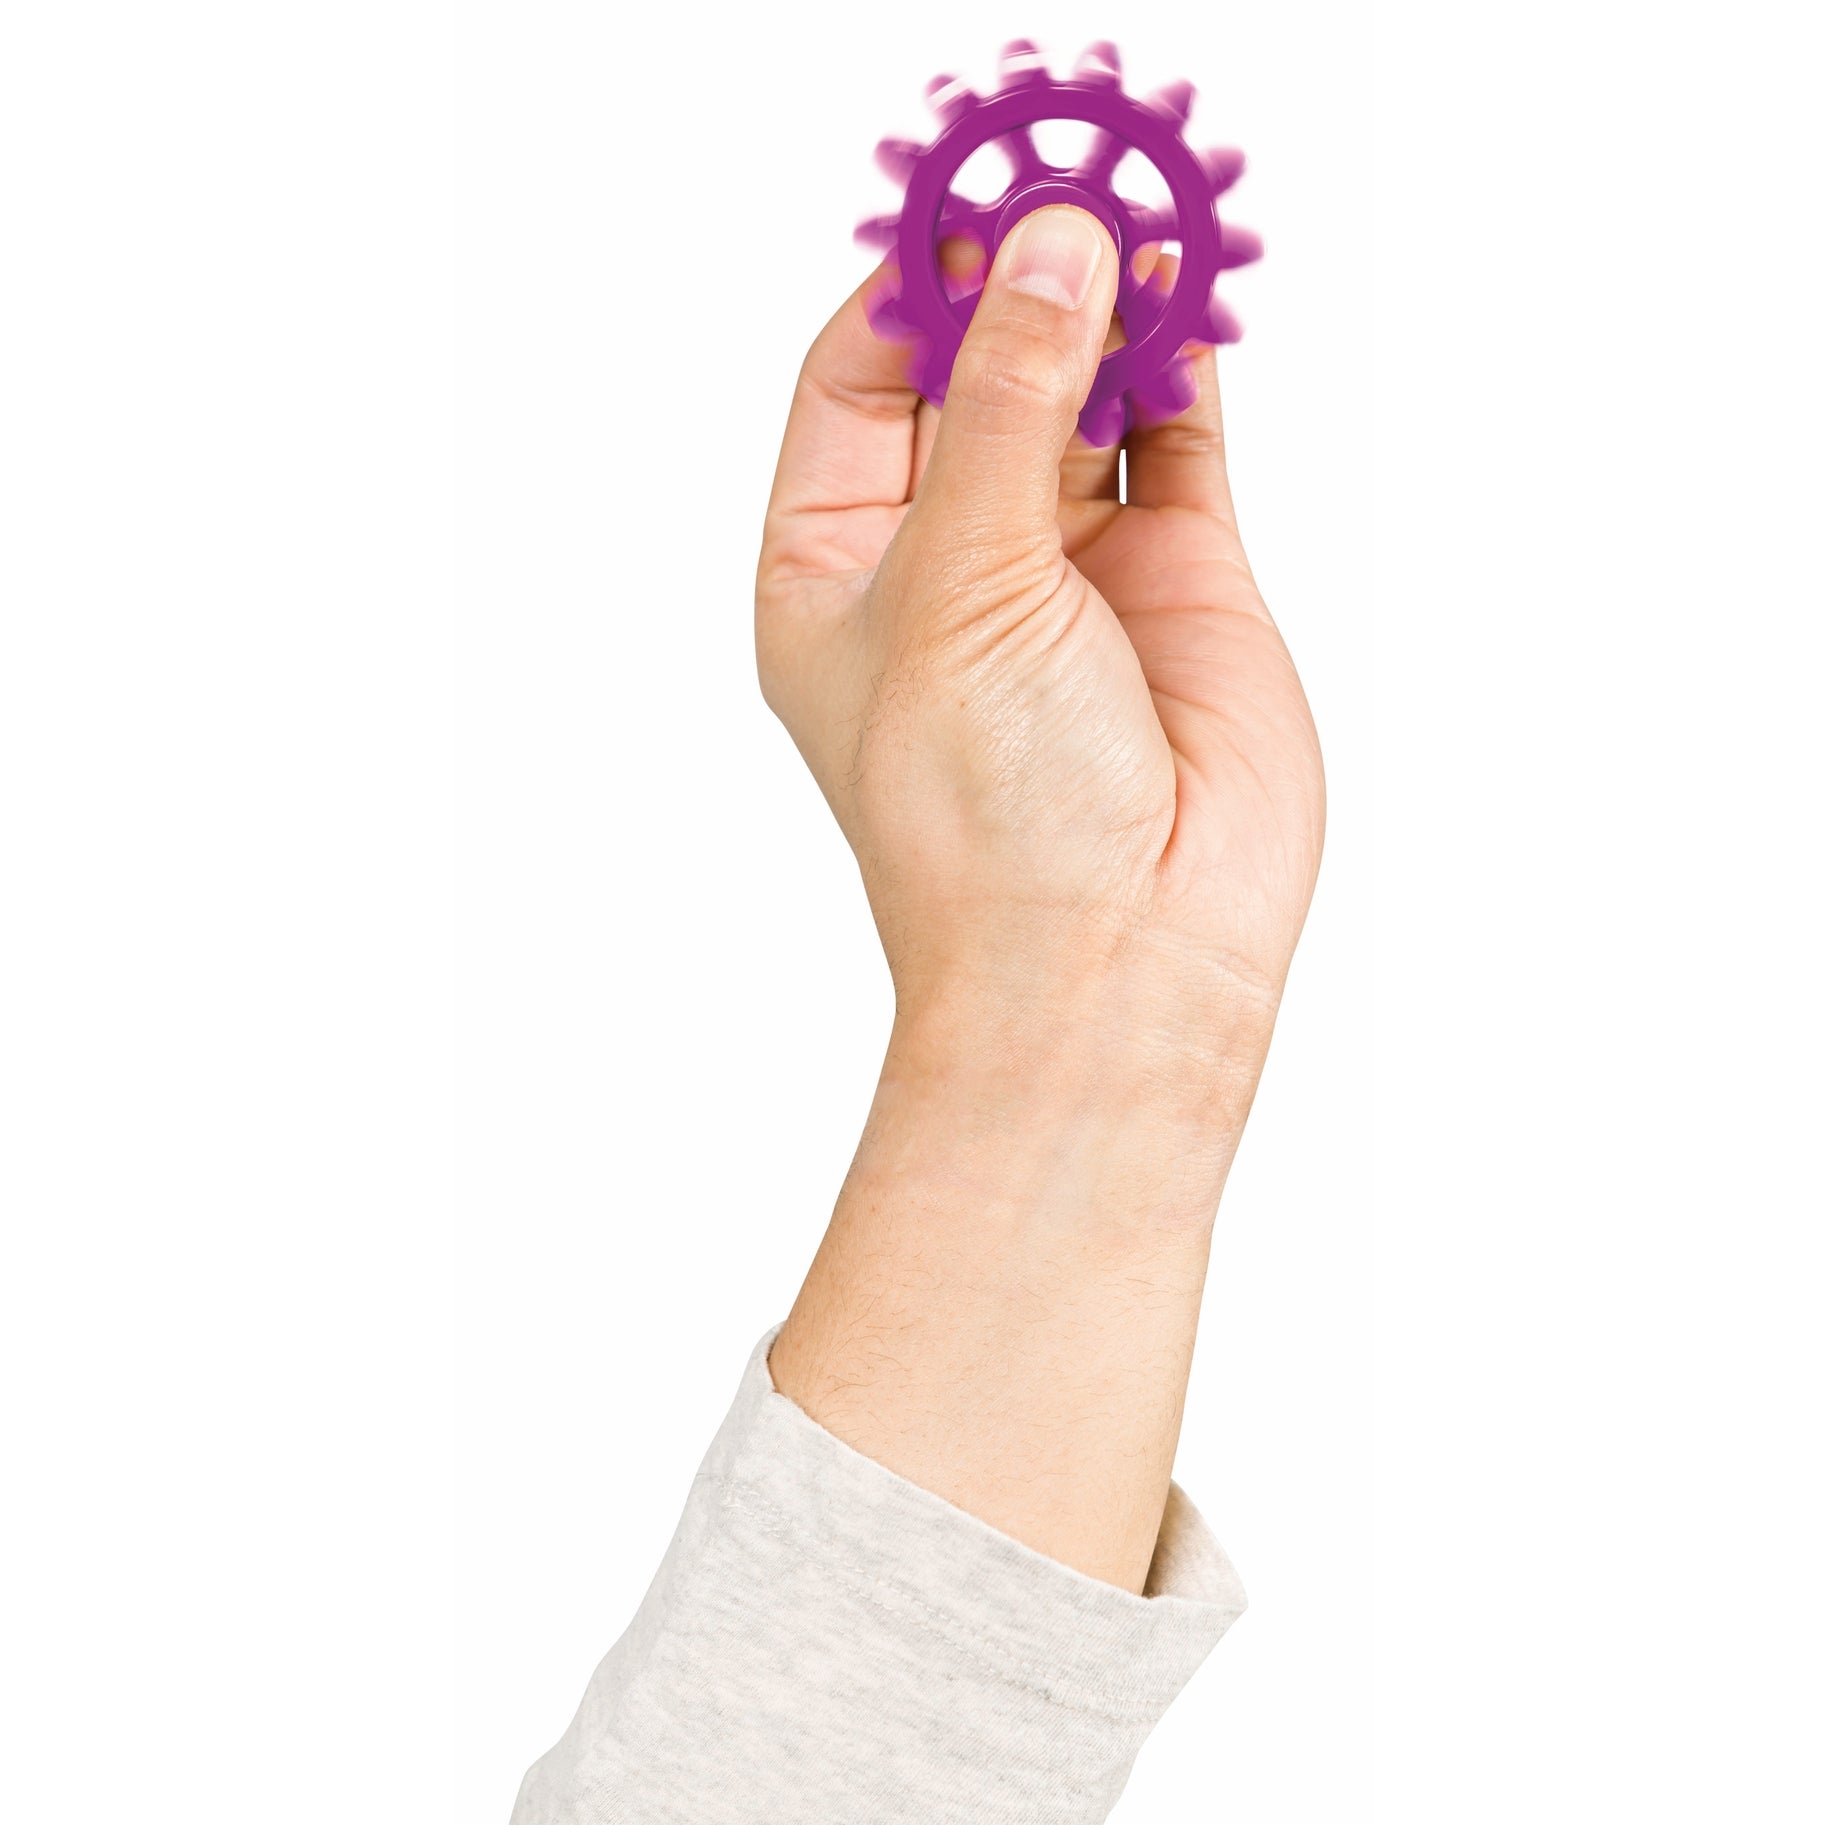 Photo of hand model, using the “Cog-Nitive” Fidget Toy.